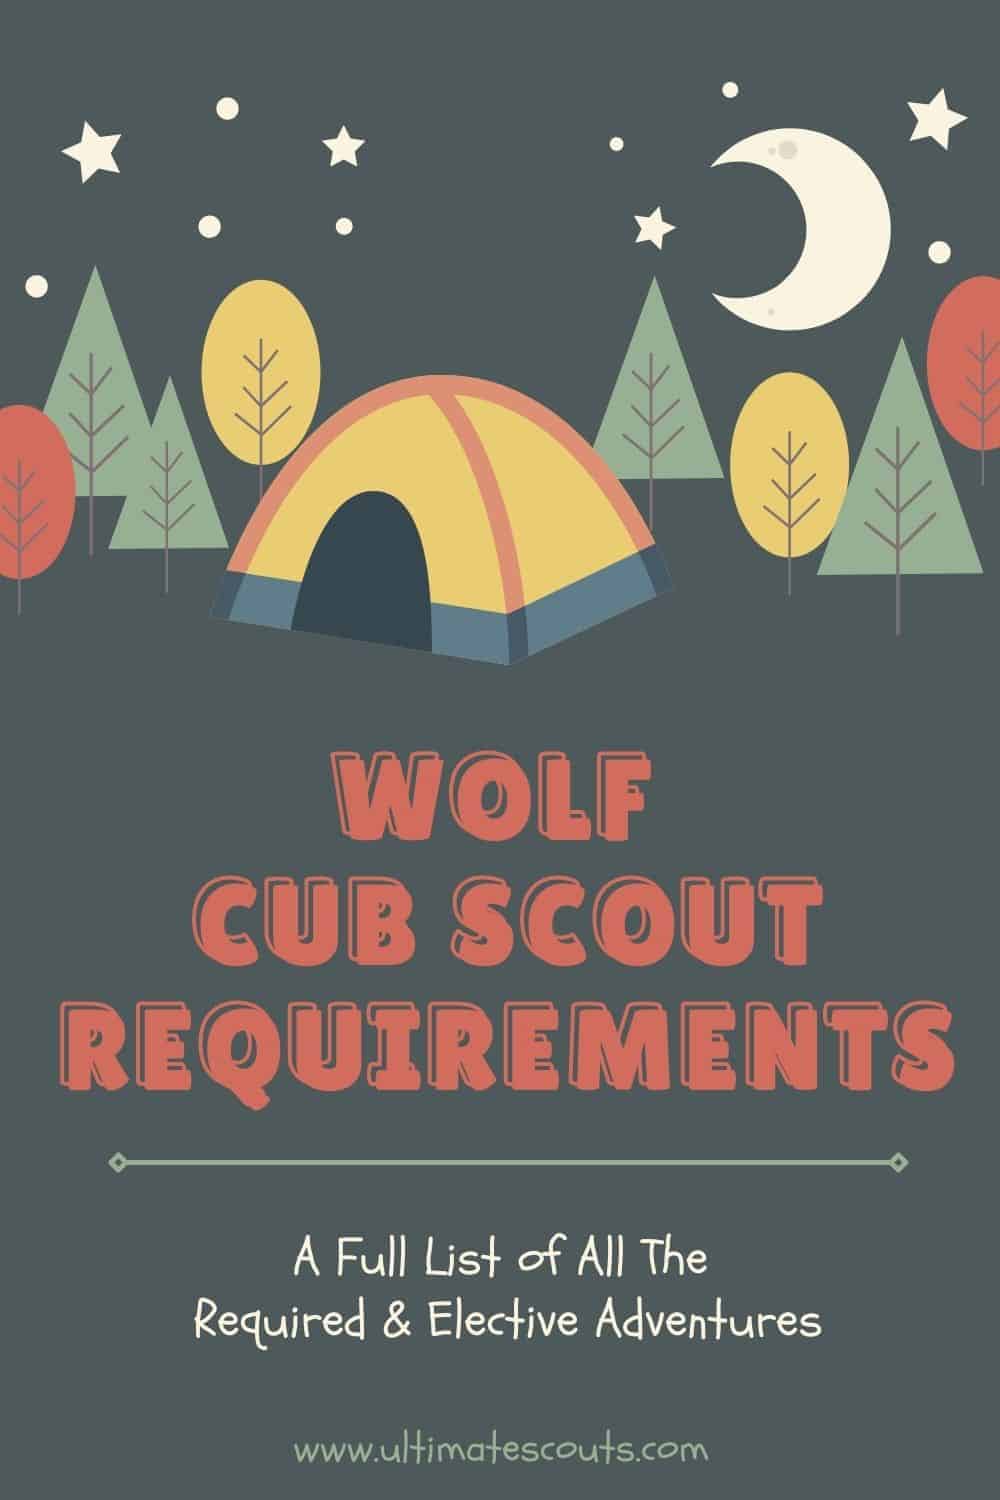 What Are The Cub Scouts Wolf Requirements?